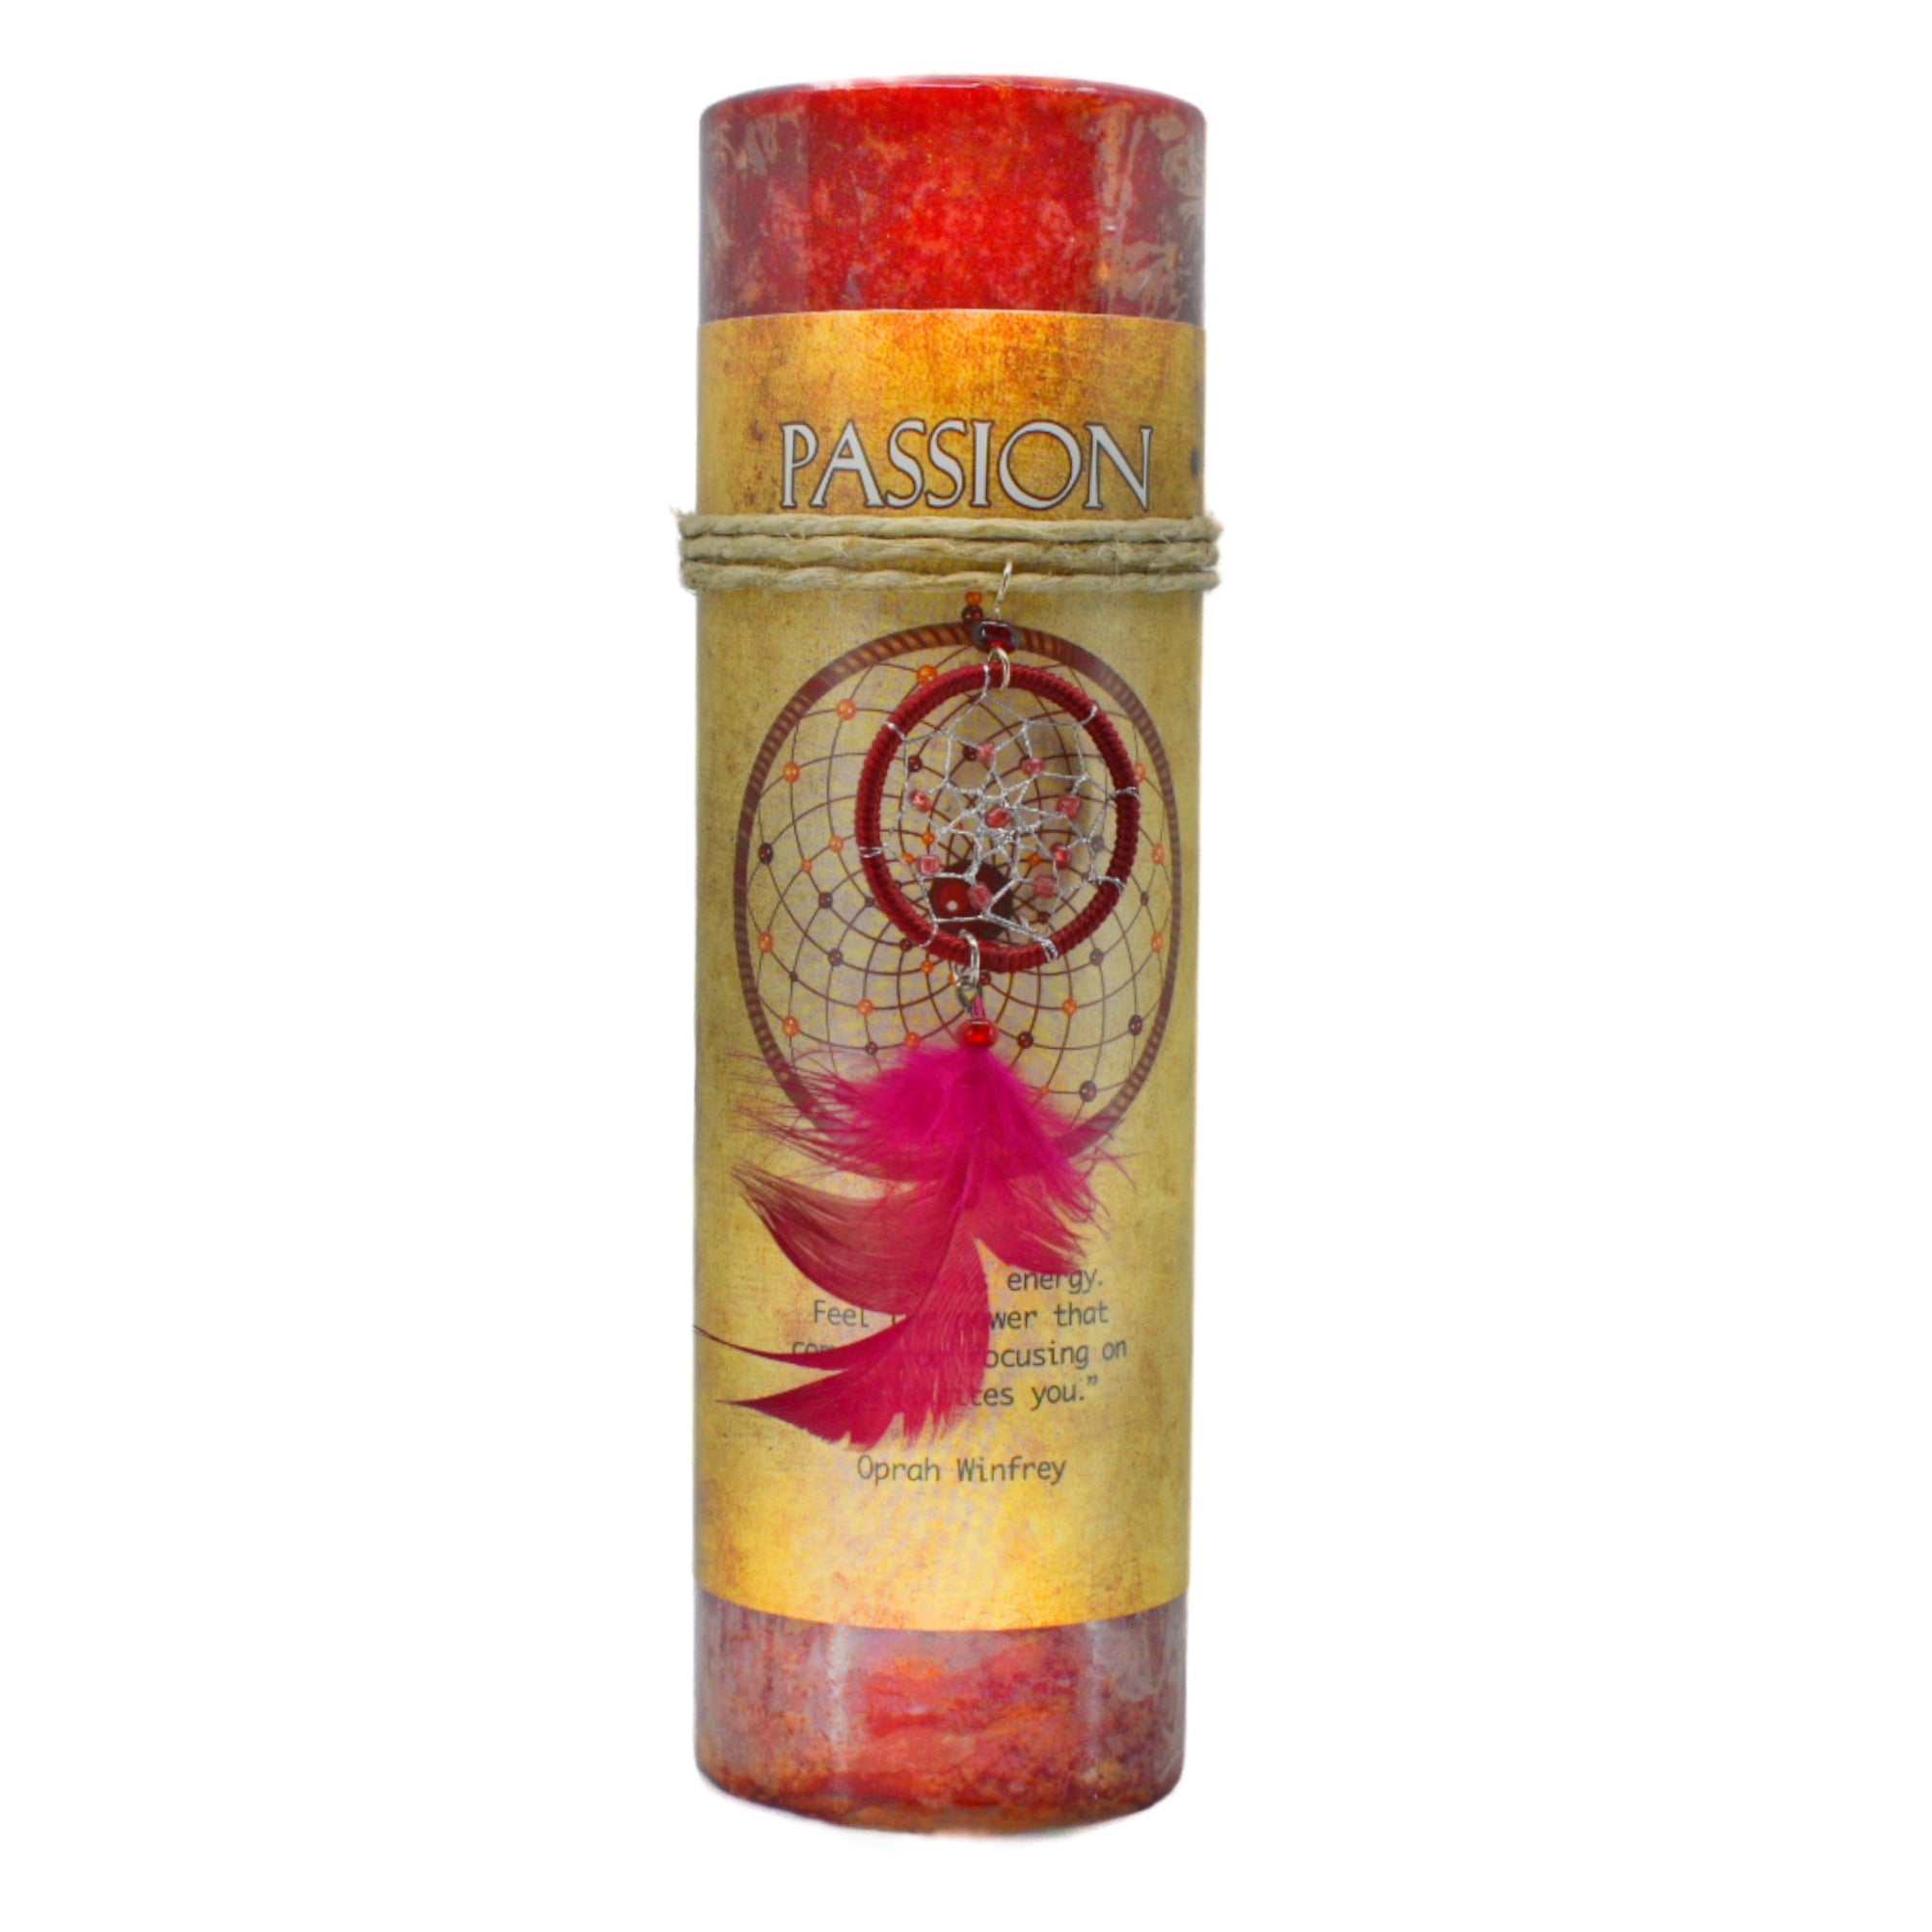 Passion Dream Catcher Candle.  This burgundy scented candle has a burgundy dream catcher attached that may be worn as a necklace or used as an amulet.  The Passion Dream Catcher candle may promote healthy relationships in your life, and enhance your inner peace.